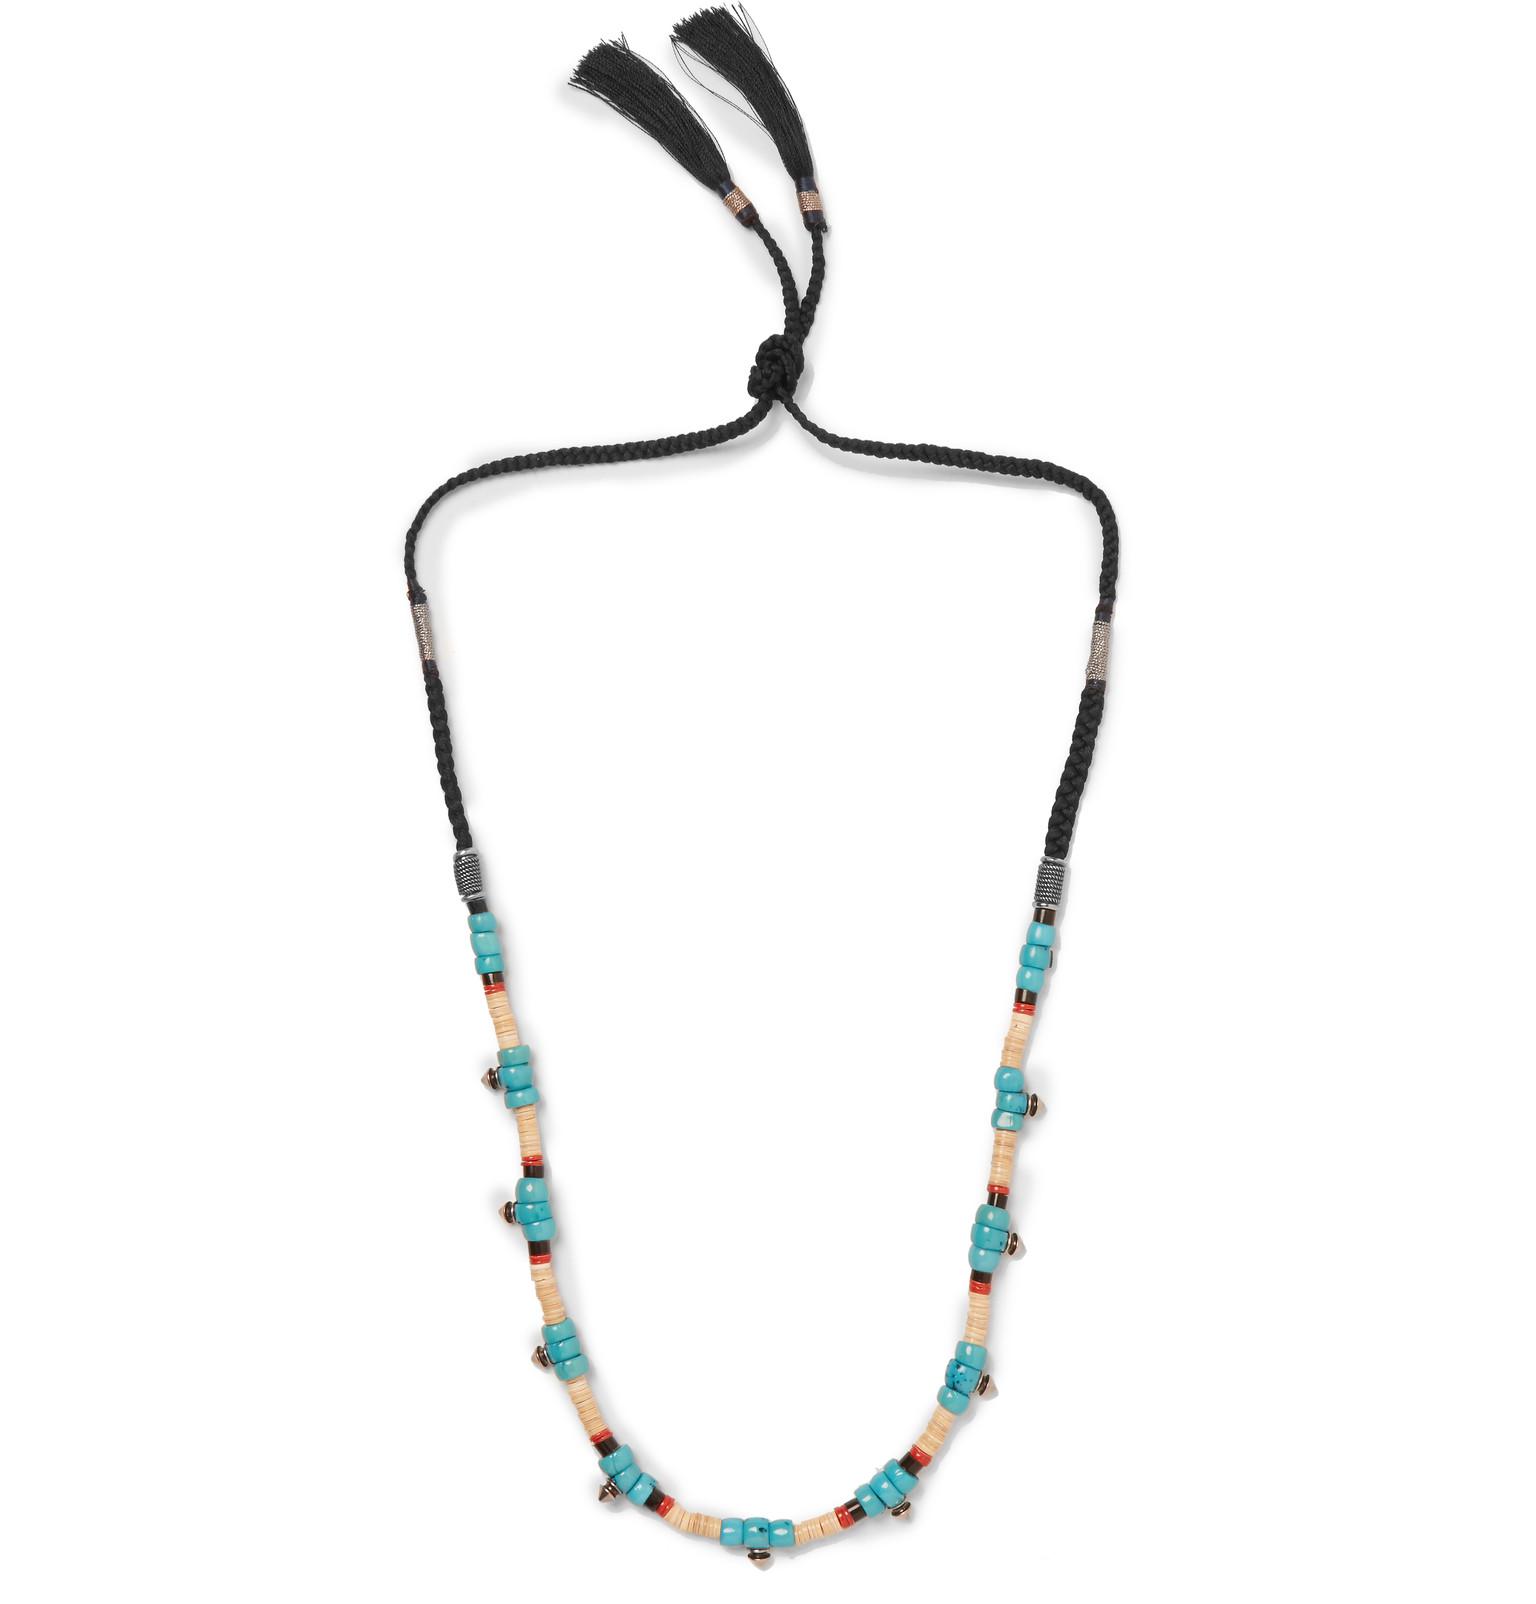 Gucci - Beaded Necklace - Turquoise for 